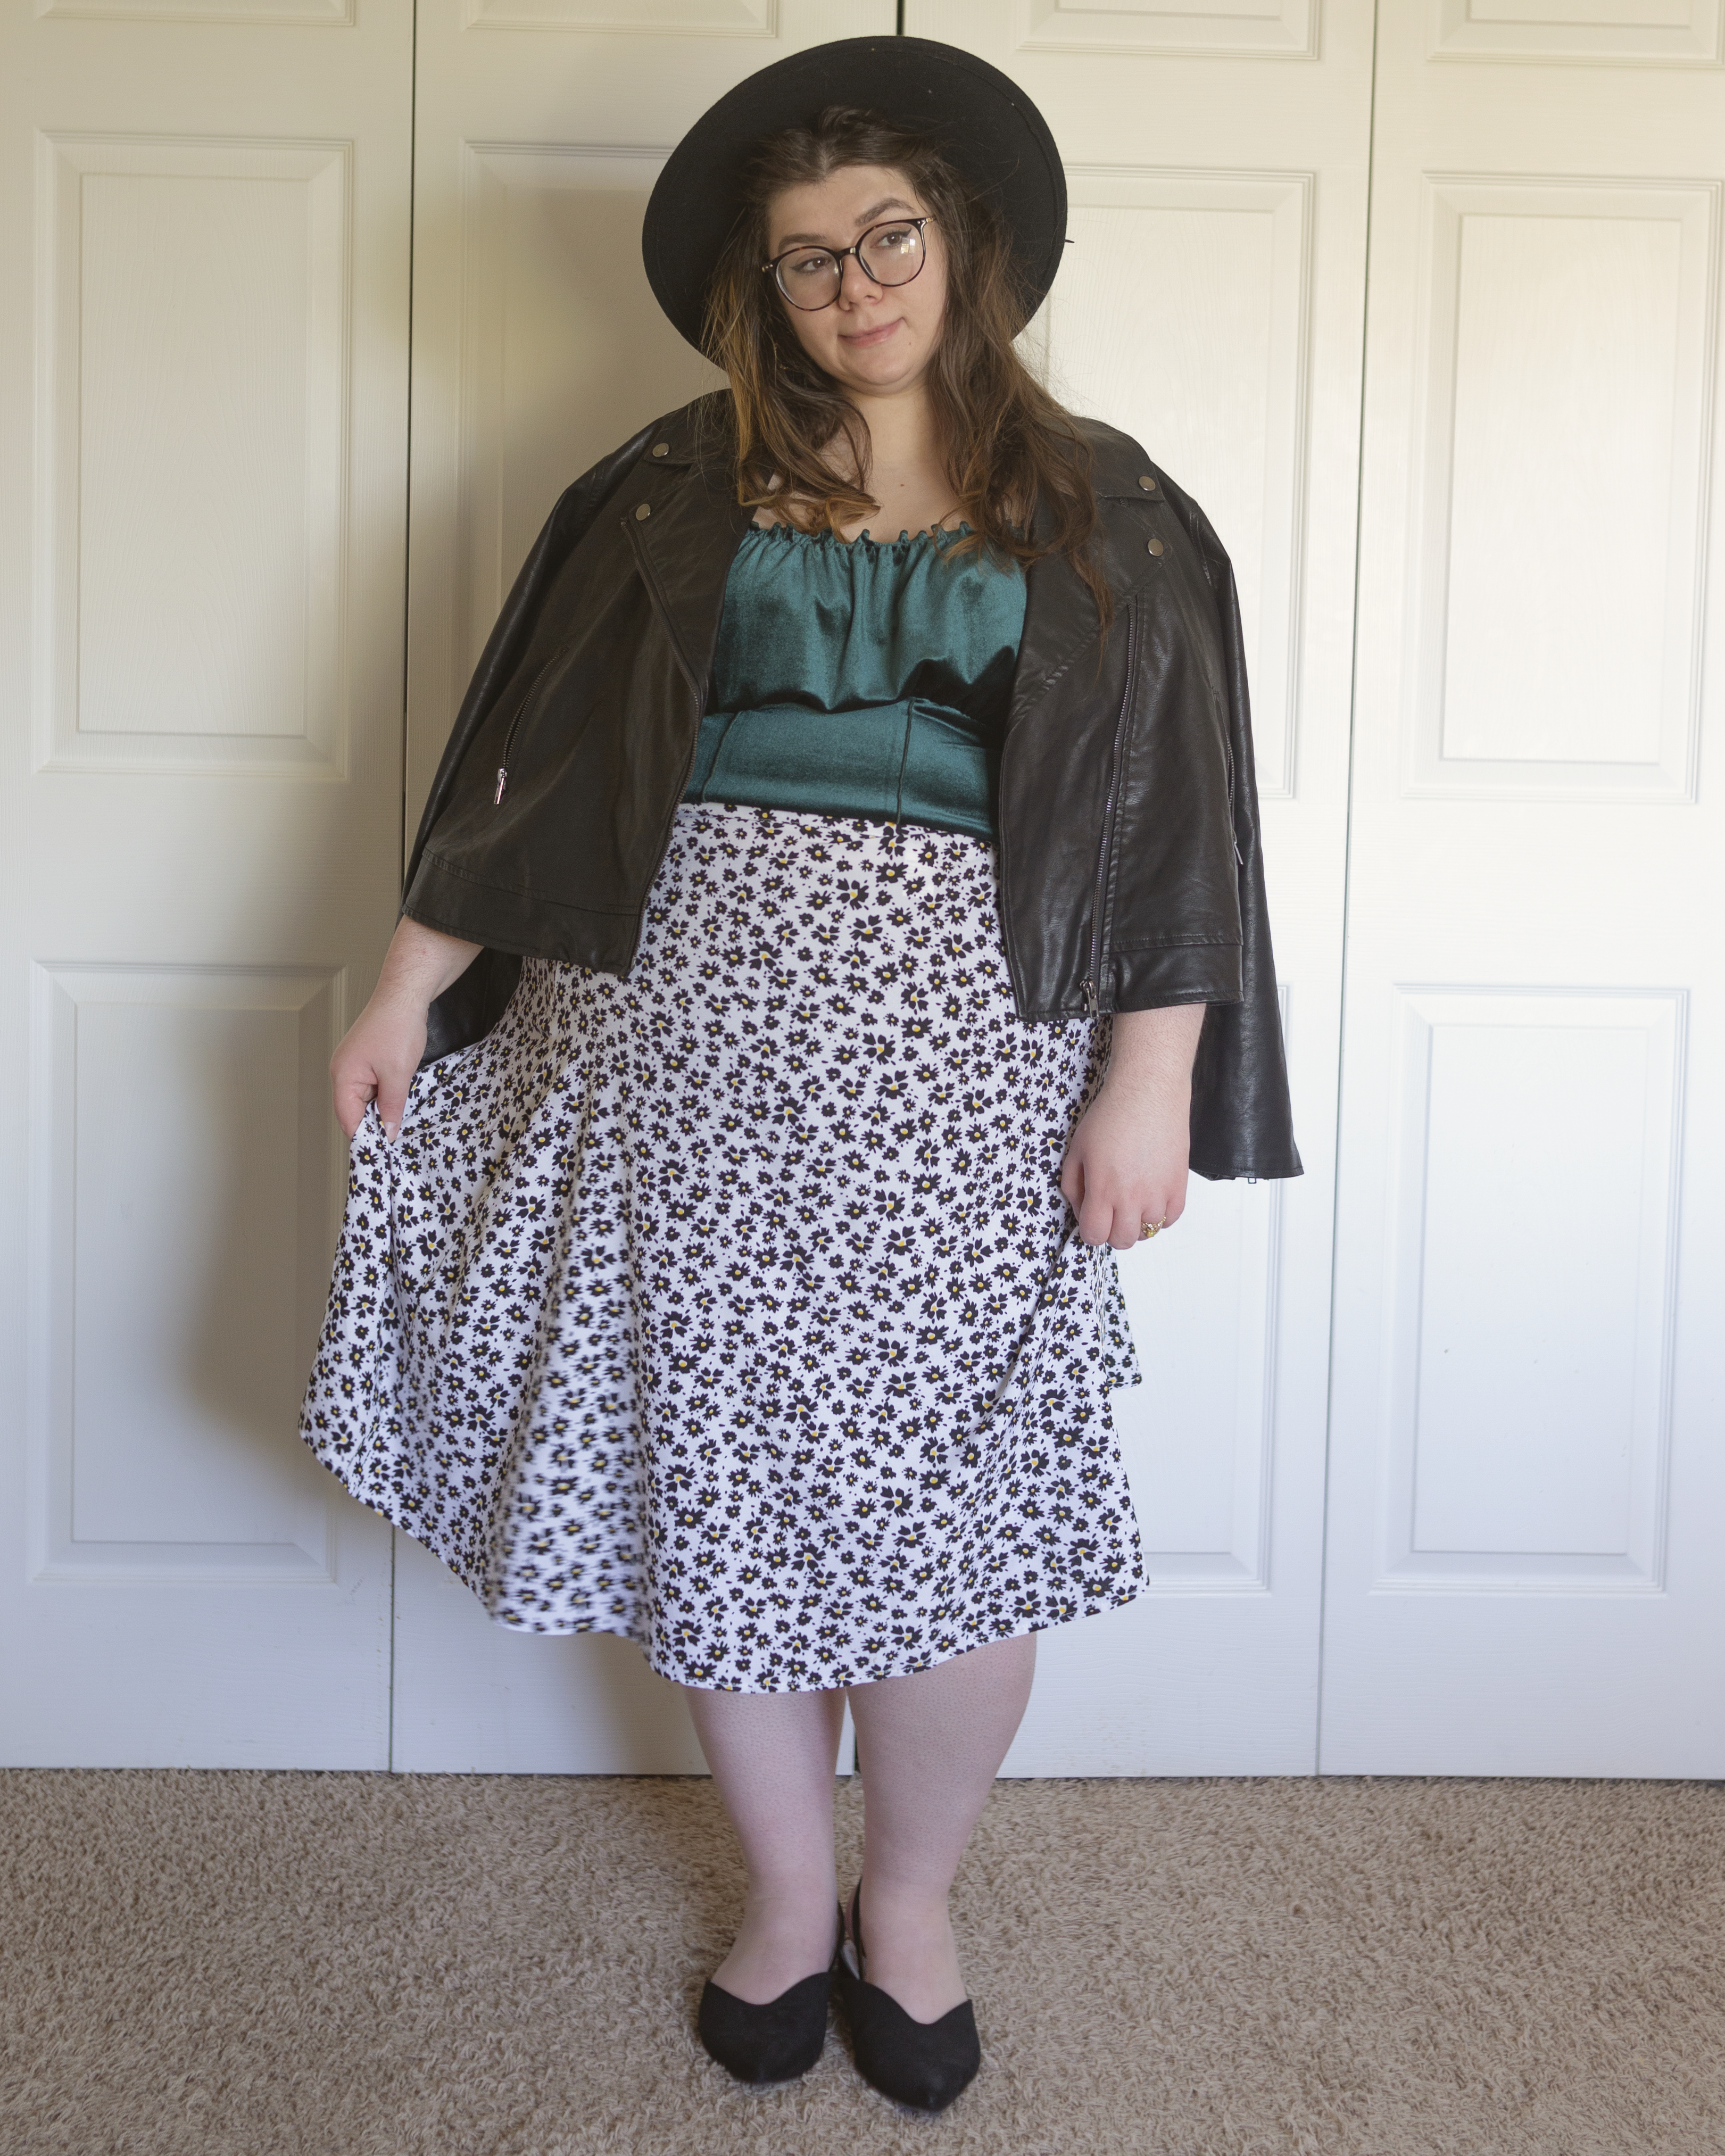 An outfit consisting of a black wide brim porkpie hat, a black faux leather moto jacket draped over the shoulders on top of a dark green velvet camisole top tucked into a black on white daisy print midi skirt and black slingback pointed toe flats.